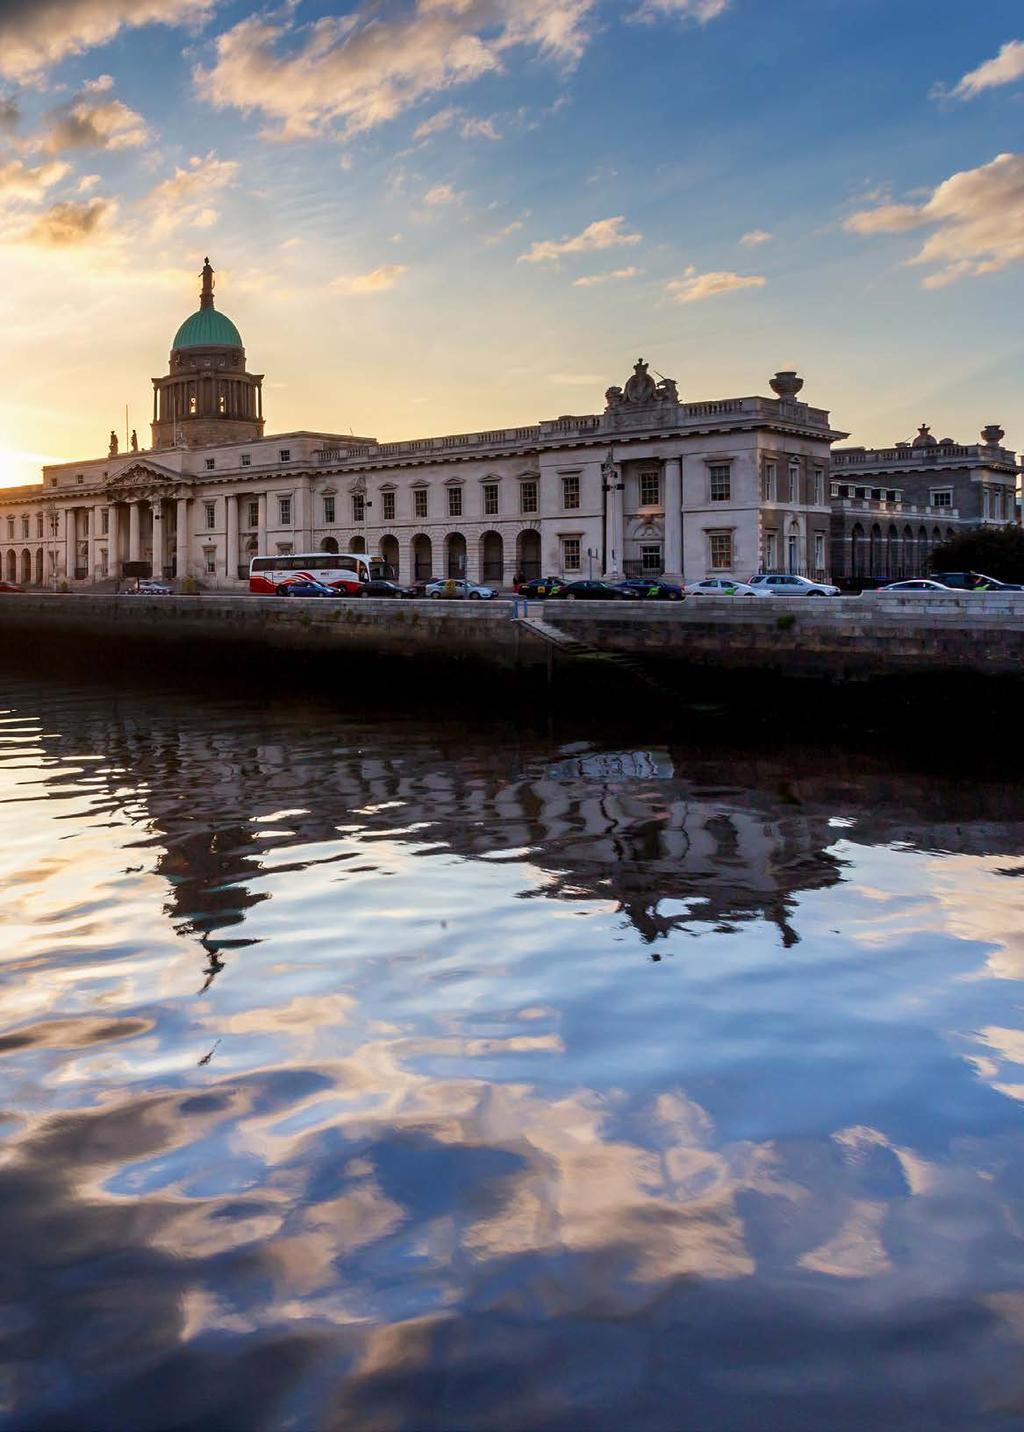 0 = The number of new hostels expected to open in Dublin City in 2018 Dublin City RevPAR is forecast to increase by +7% in 2018, with YTD 2018 RevPAR growth of +8% Offering development potential and